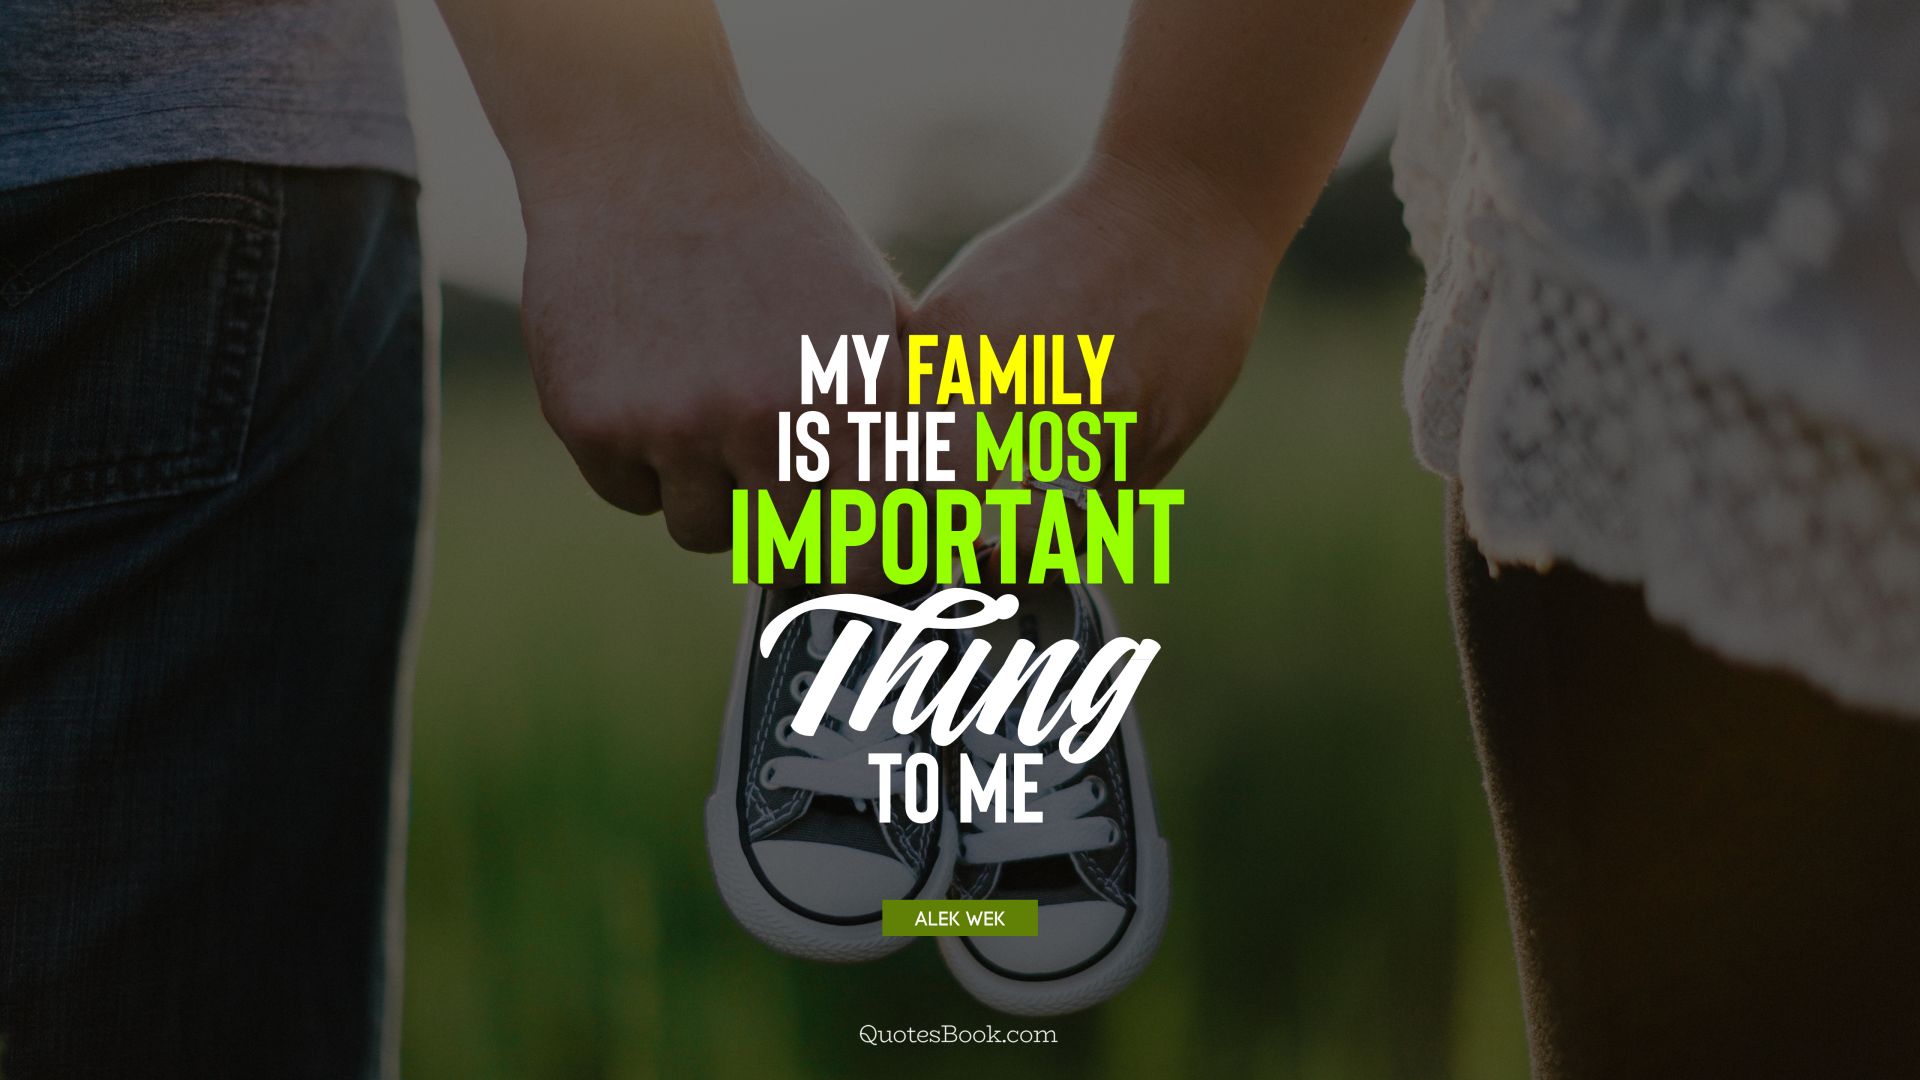 My family is the most important thing to me. - Quote by Alek Wek